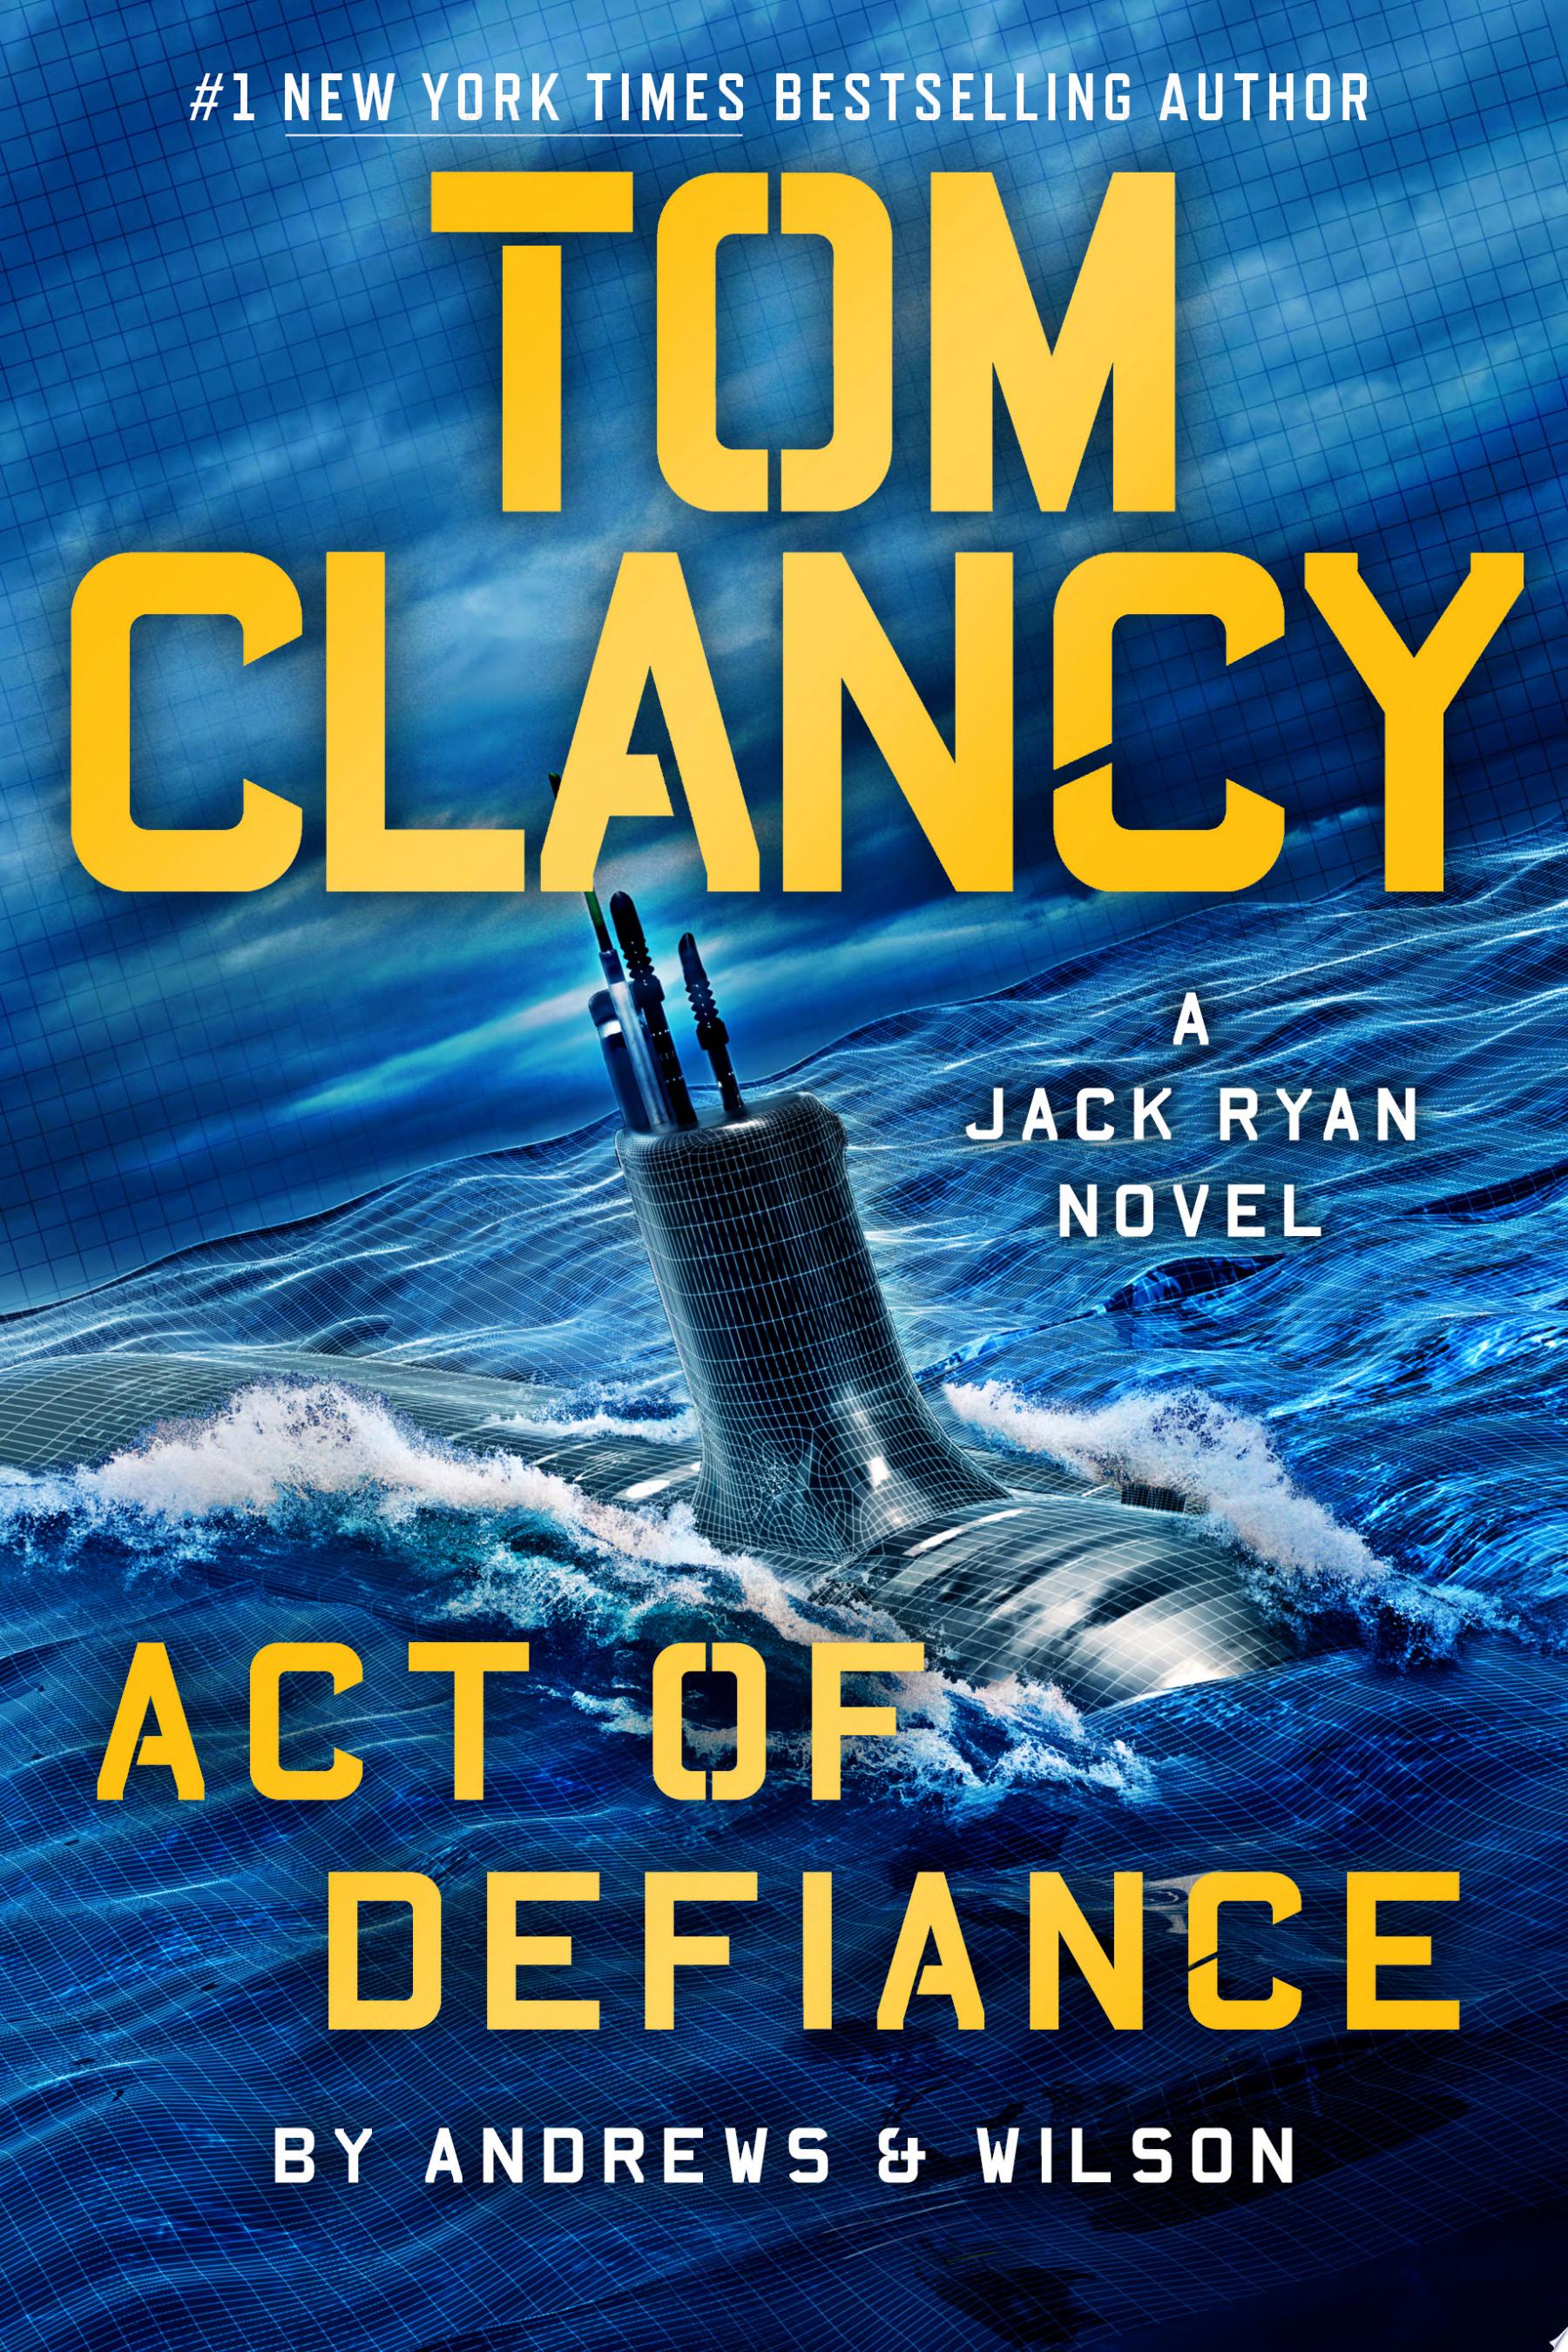 Image for "Tom Clancy Act of Defiance"